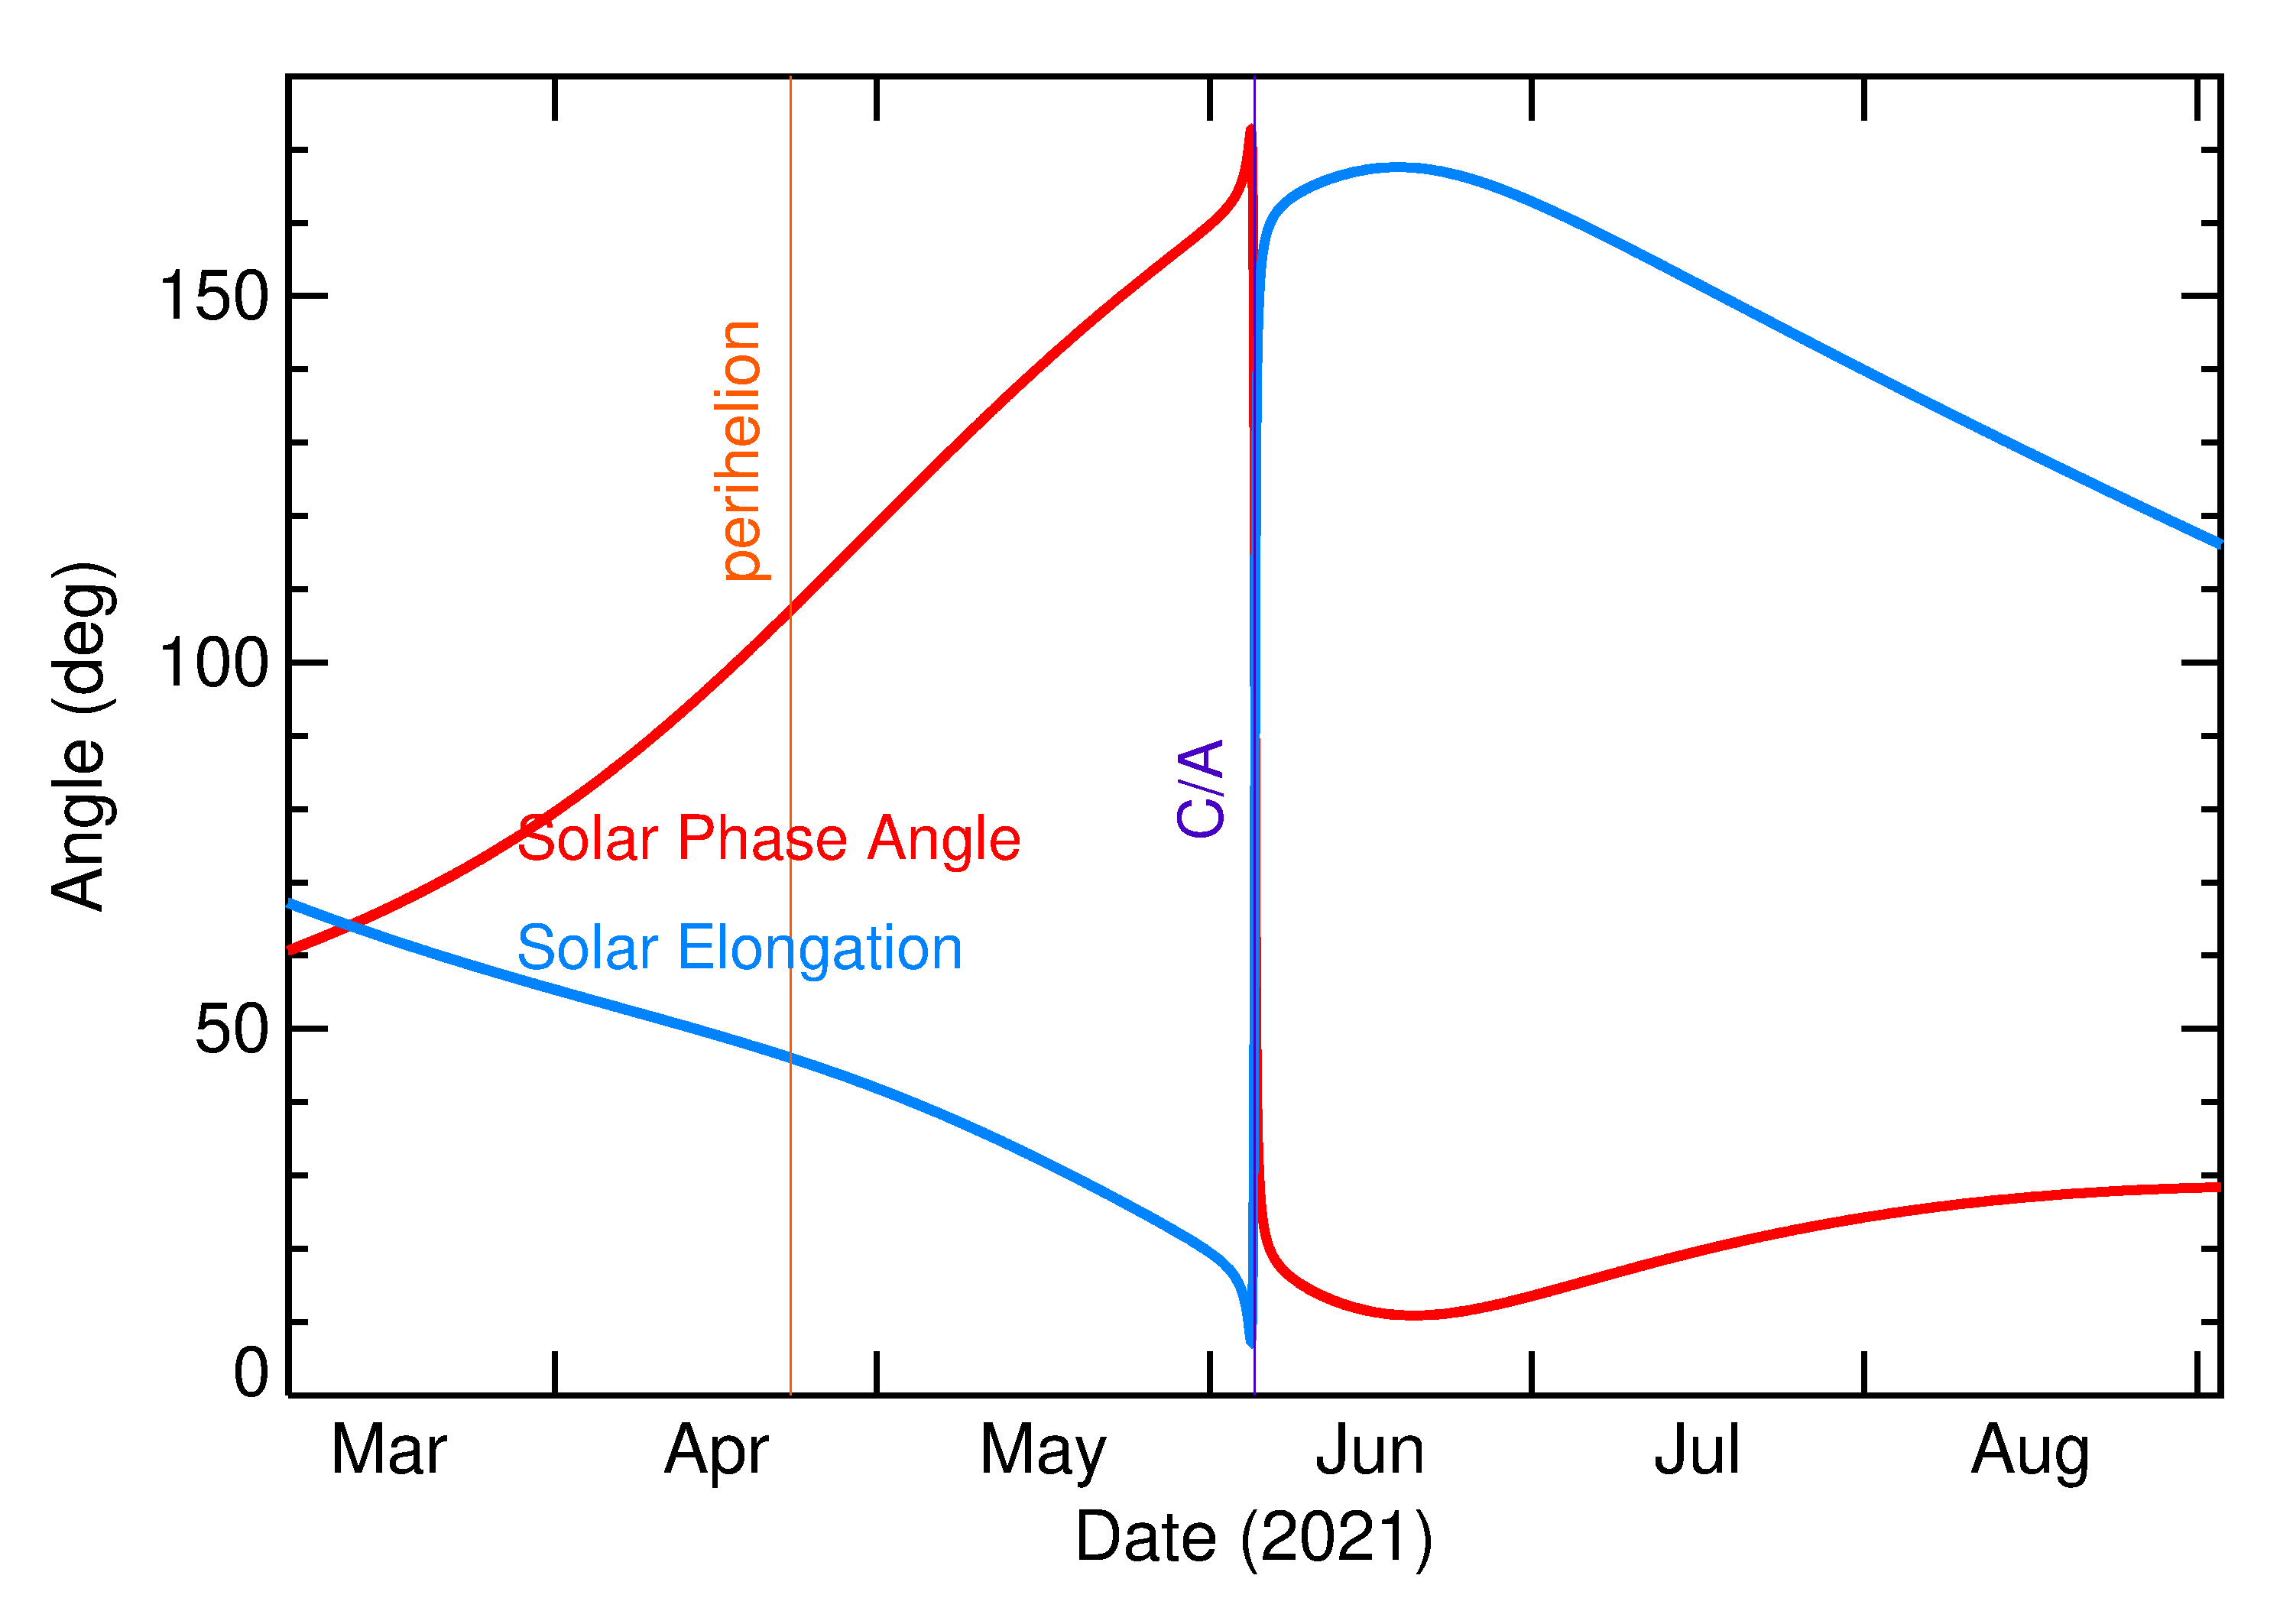 Solar Elongation and Solar Phase Angle of 2021 LX1 in the months around closest approach